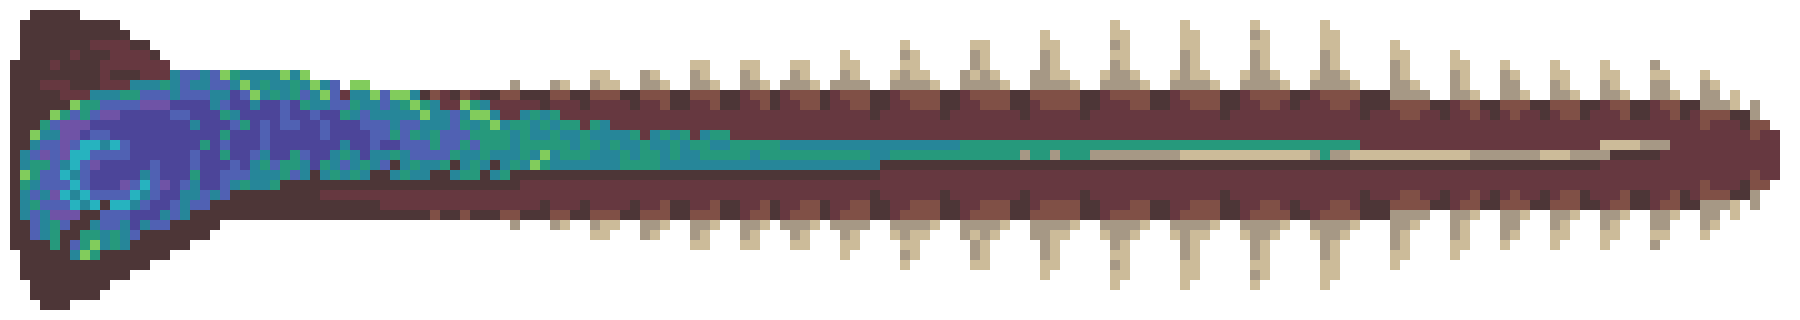 pixel art of a huge sawfish rostrum and an intricate, colourful feather